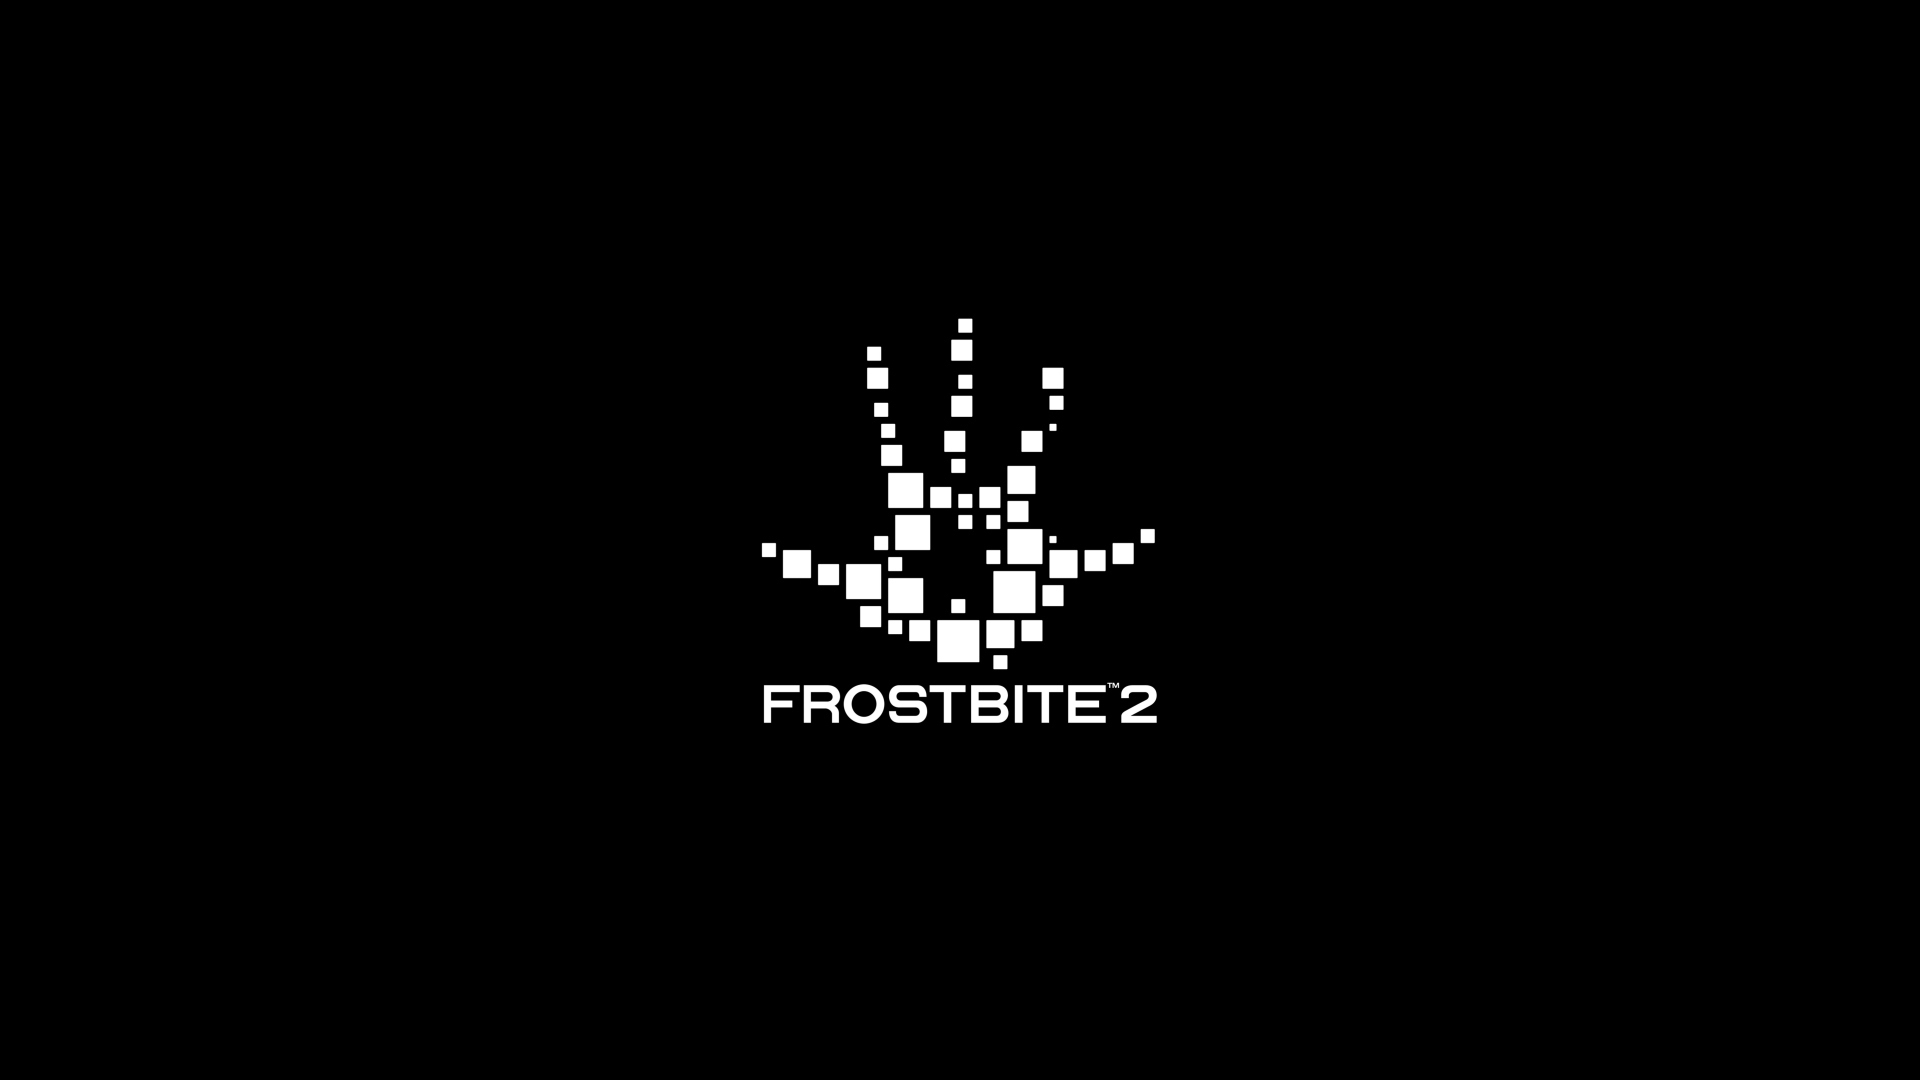 Frostbite 2 for 1920 x 1080 HDTV 1080p resolution